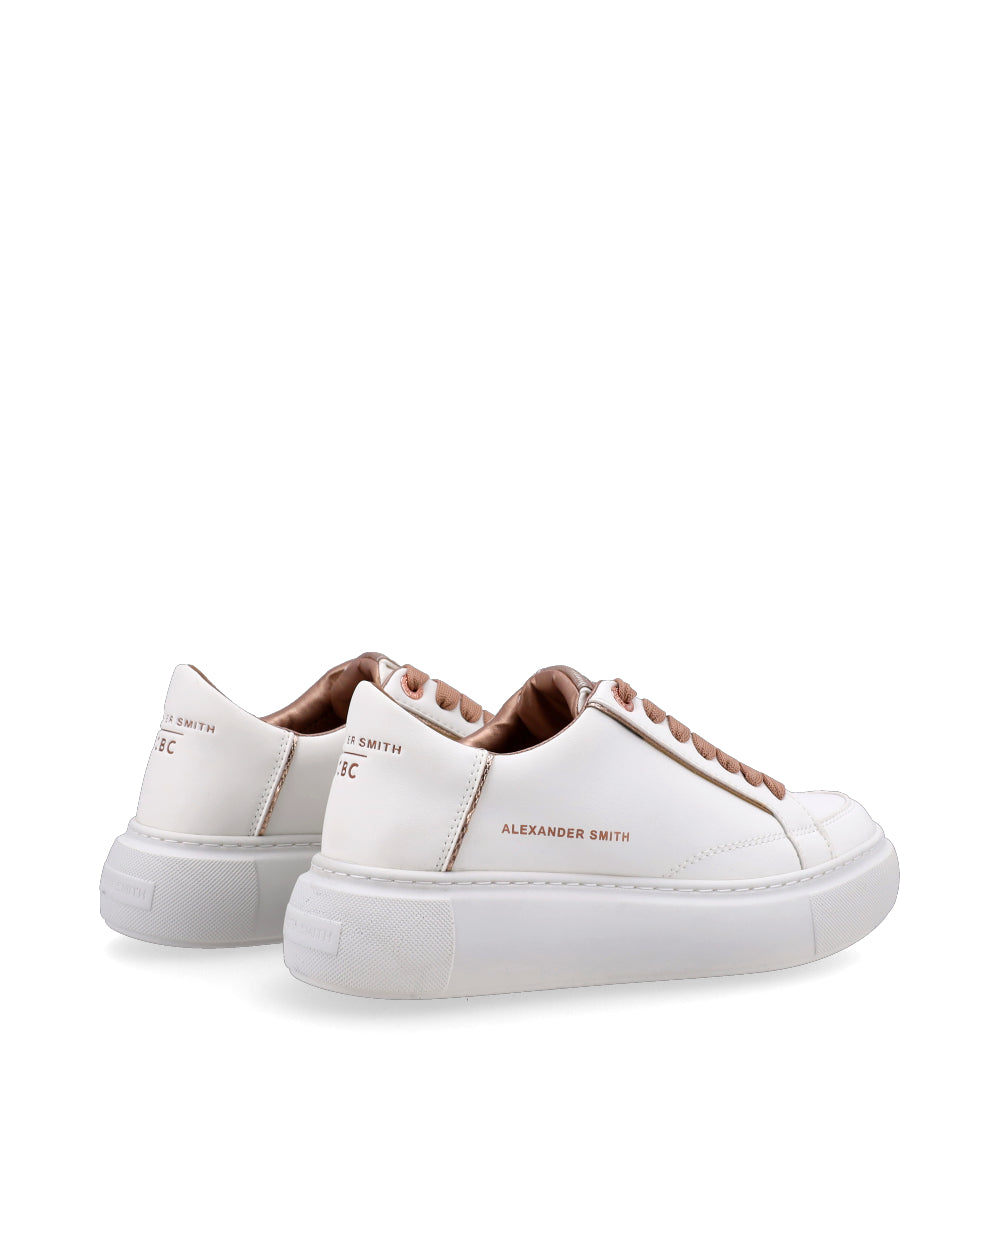 ALEXANDER SMITH | ACBC GREENWICH SNEAKERS